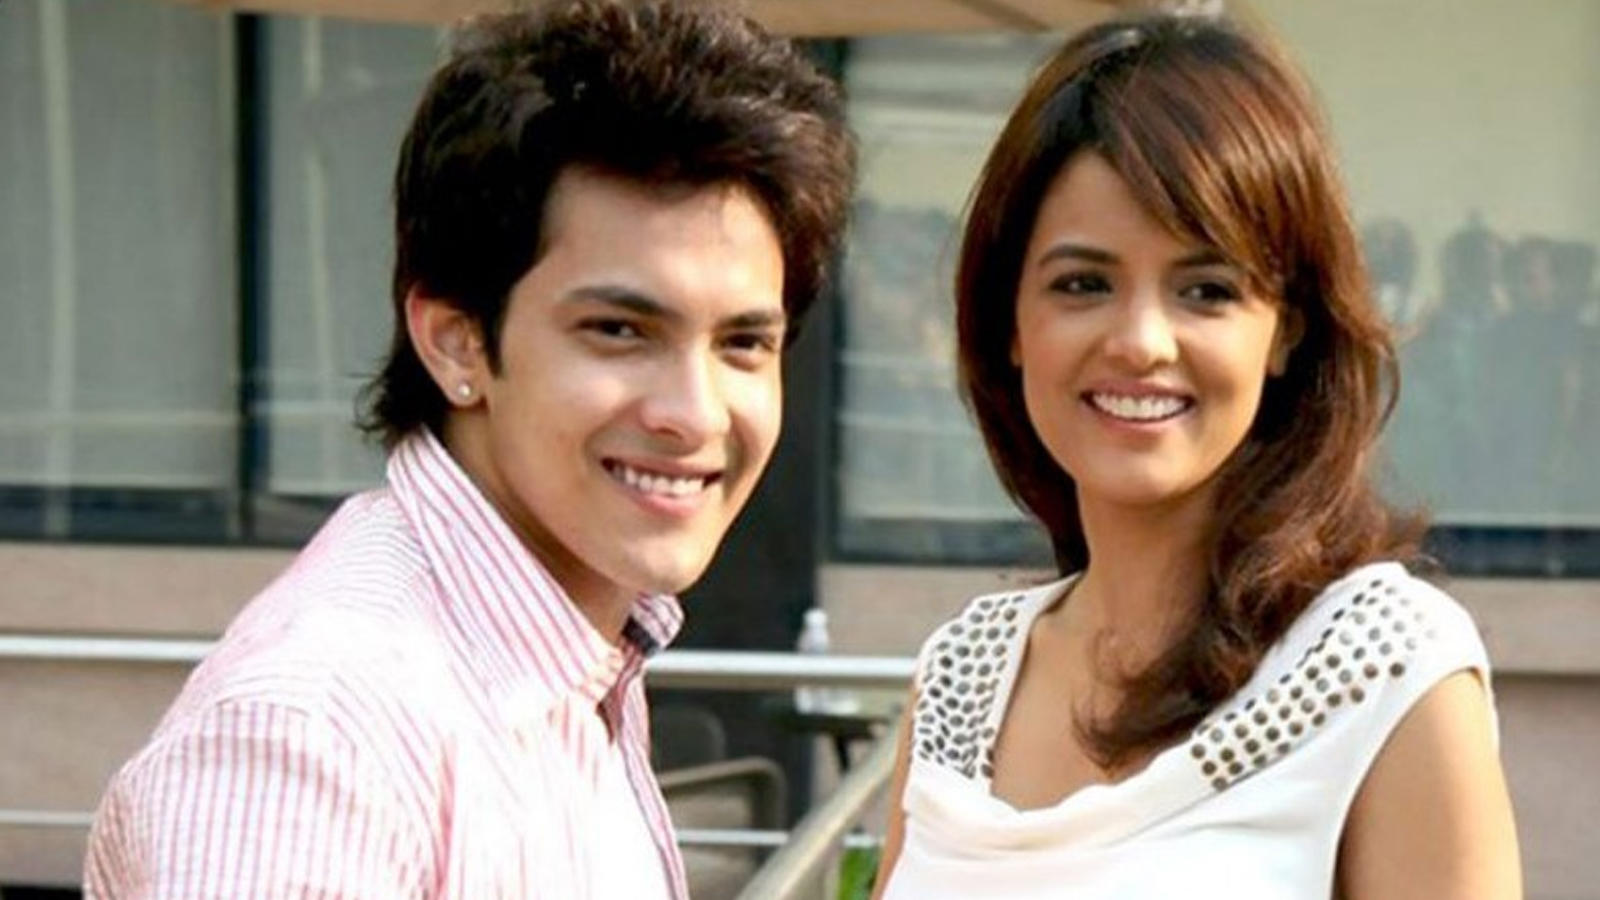 Aditya Narayan And Shweta Agarwal To Get Married In A Simple Temple On December 1 2020 Hindi Movie News Bollywood Times Of India Poslednie tvity ot meghana narayan (@narayanmeghana). aditya narayan and shweta agarwal to get married in a simple temple on december 1 2020